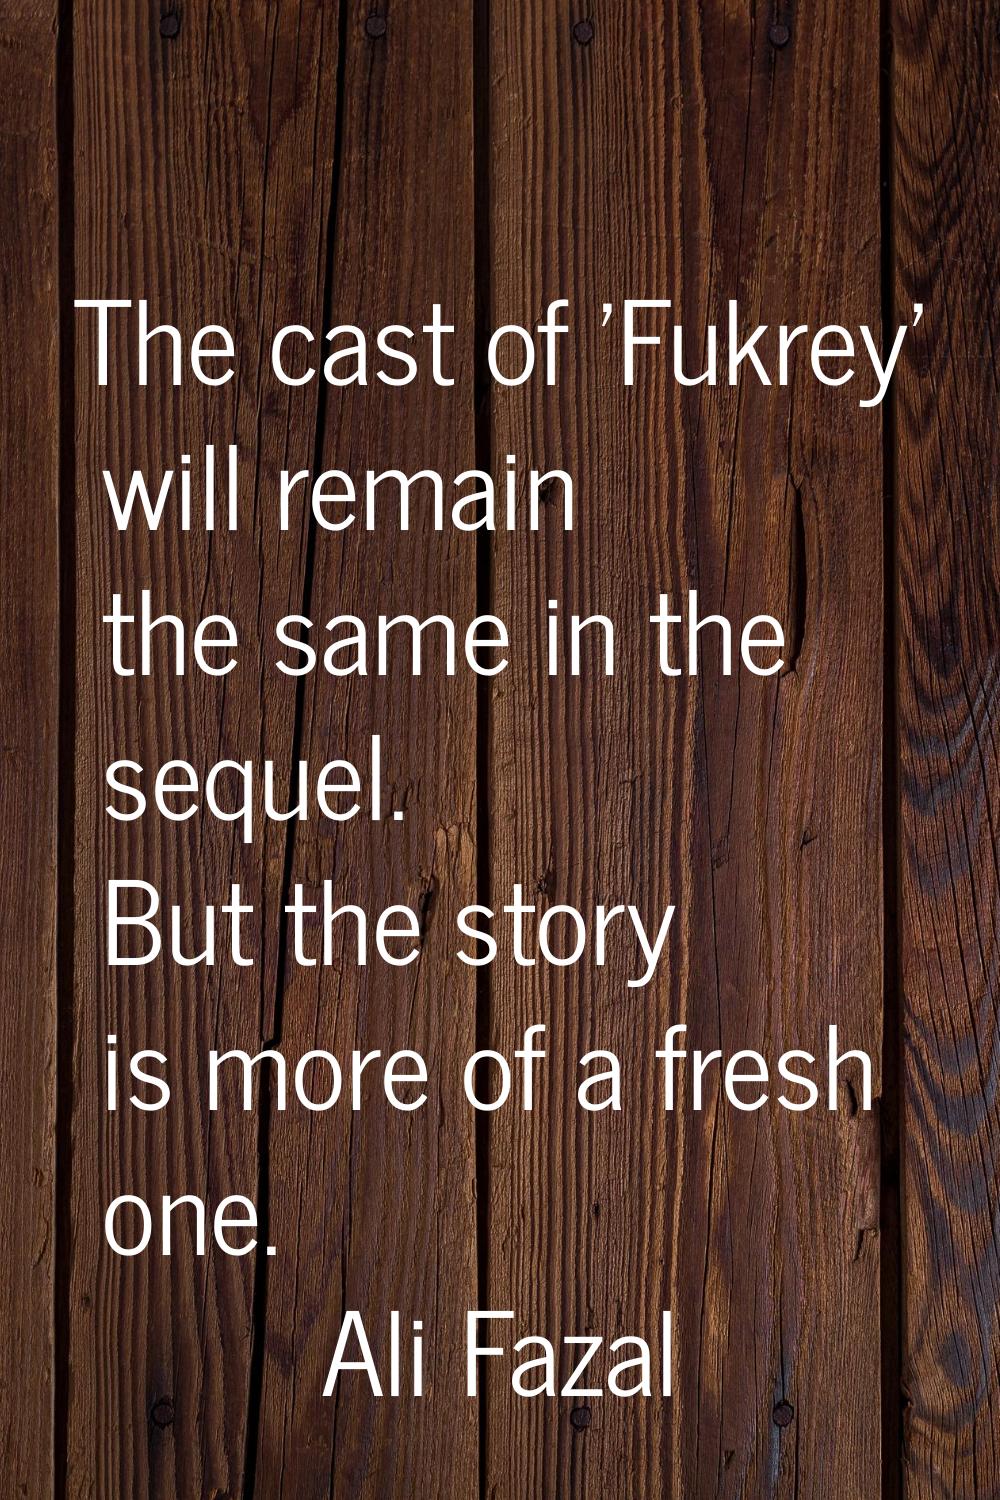 The cast of 'Fukrey' will remain the same in the sequel. But the story is more of a fresh one.